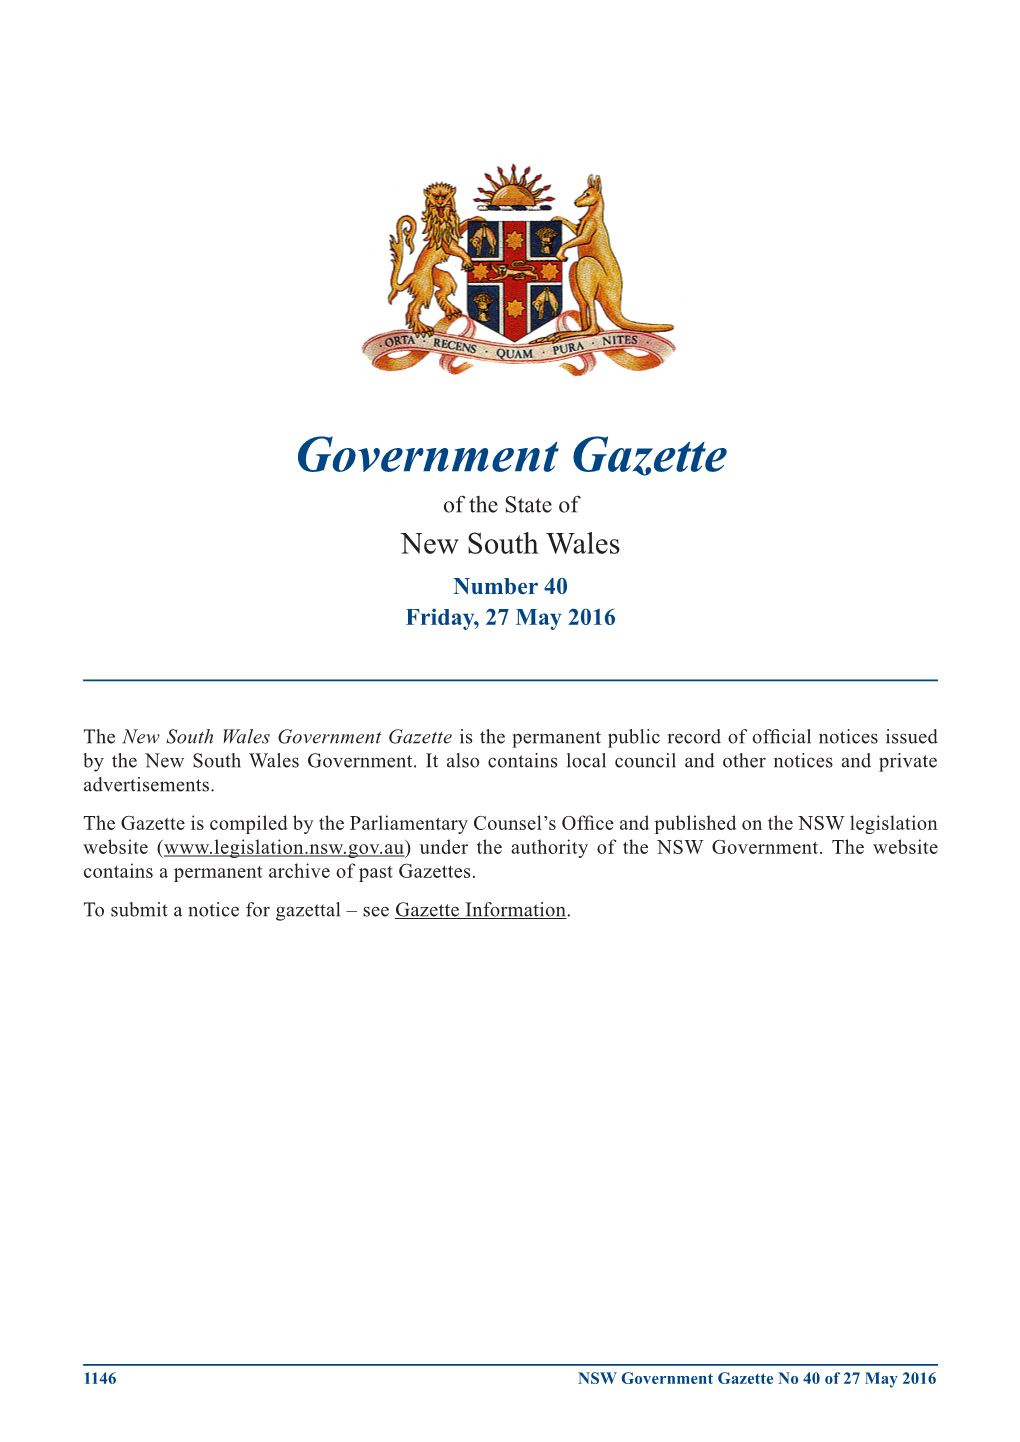 Government Gazette No 40 of 27 May 2016